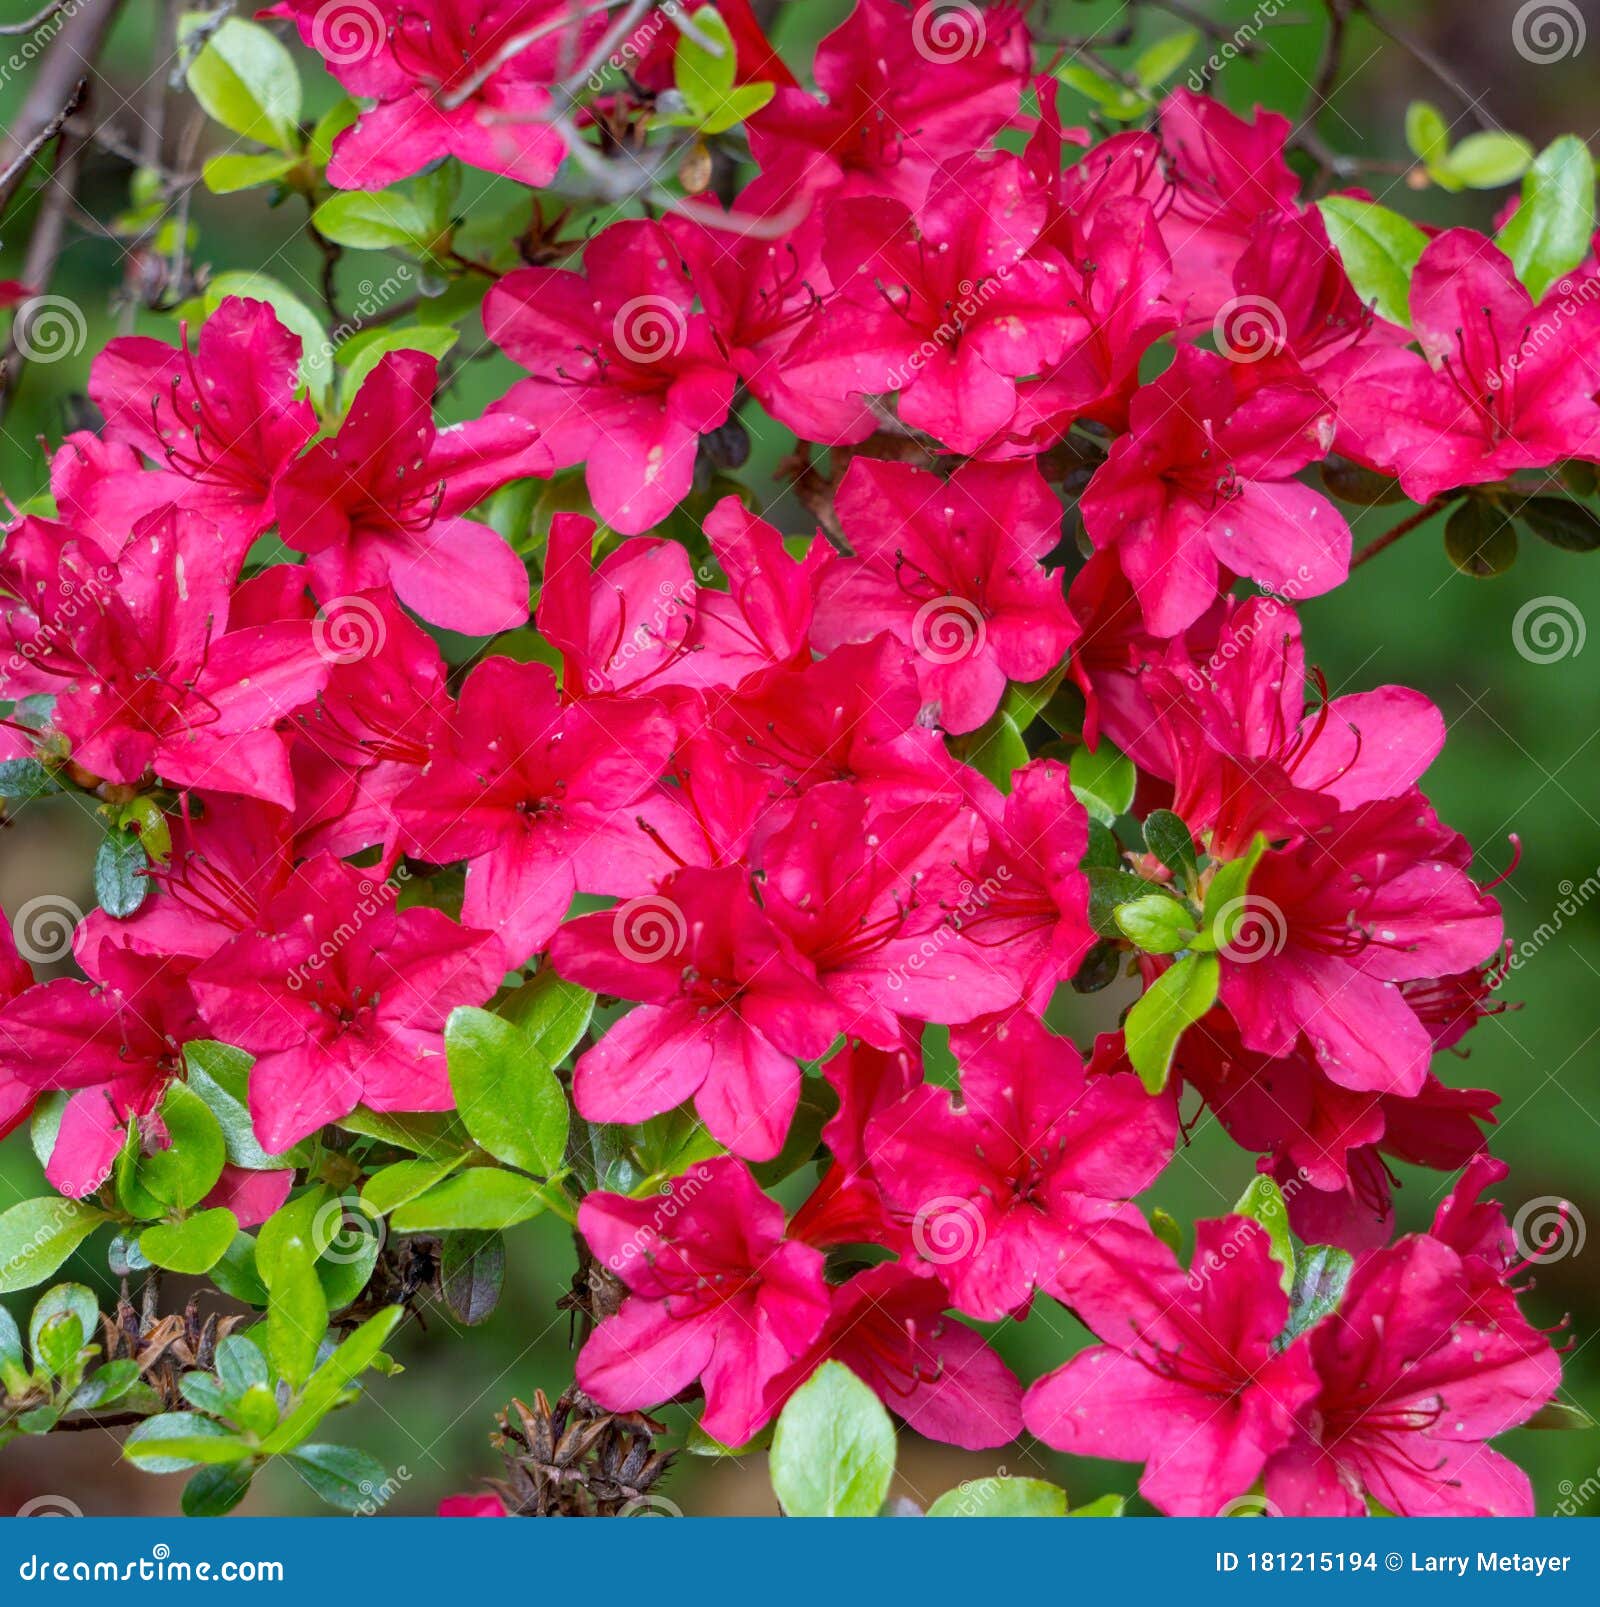 red azalea wildflowers in the mountains of virginia, usa.